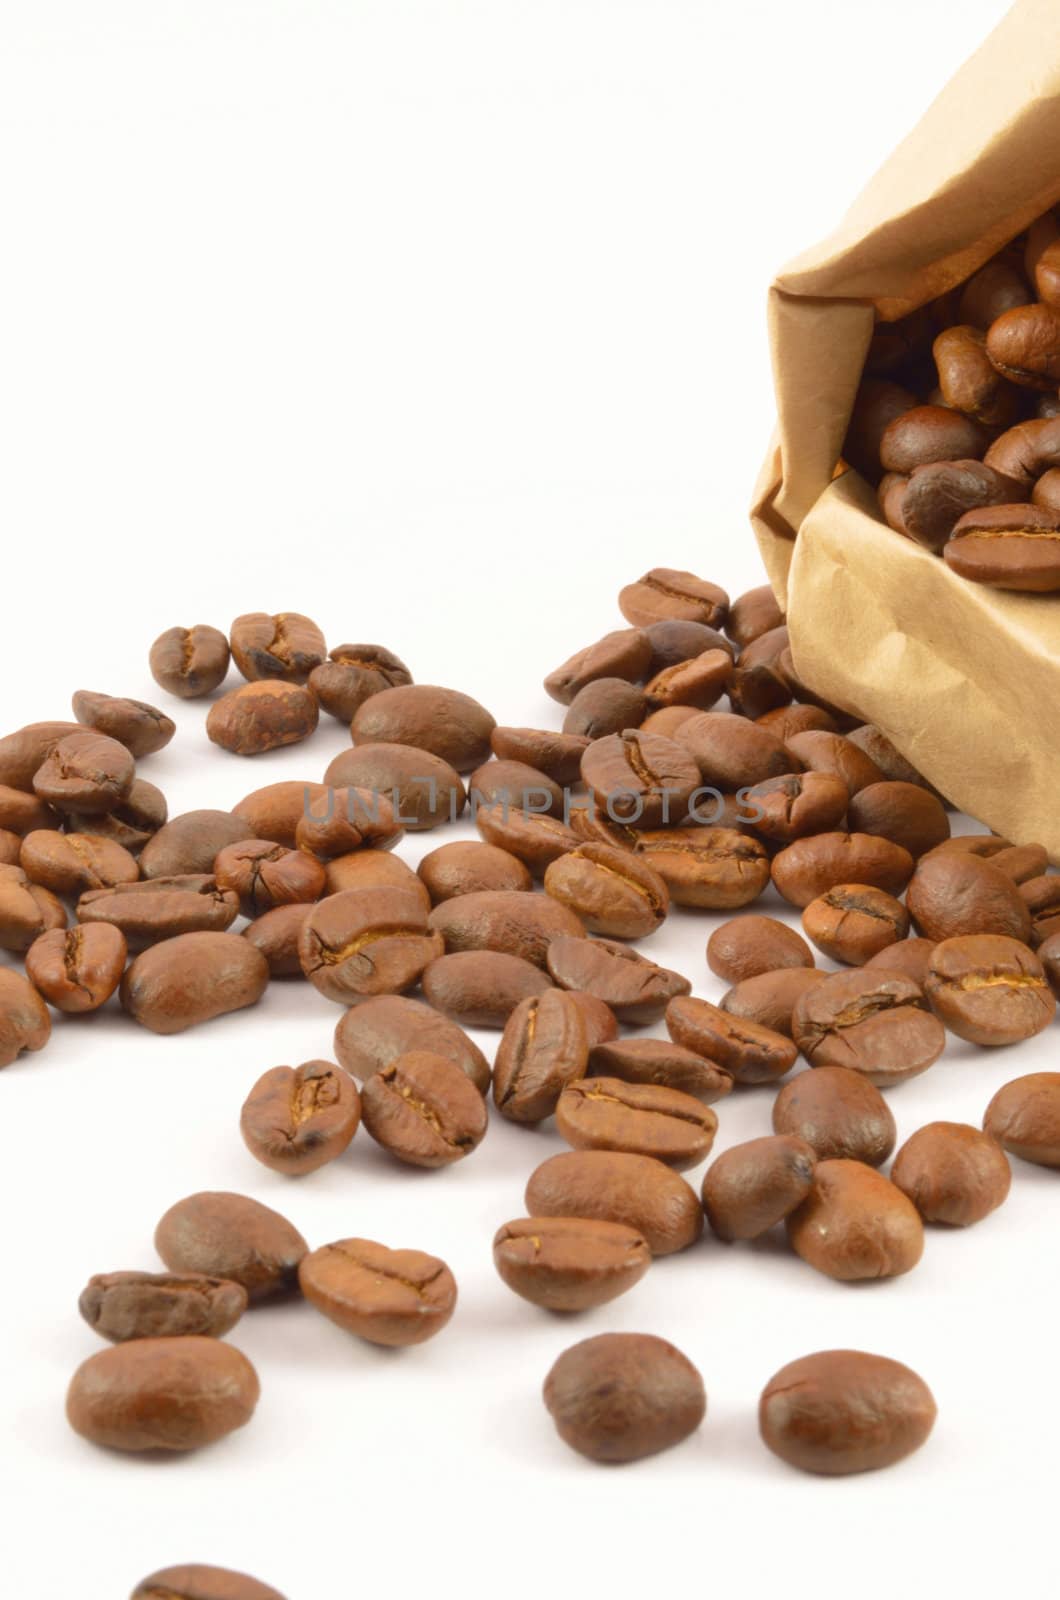 Roasted coffee grains close-up on an isolated white background 